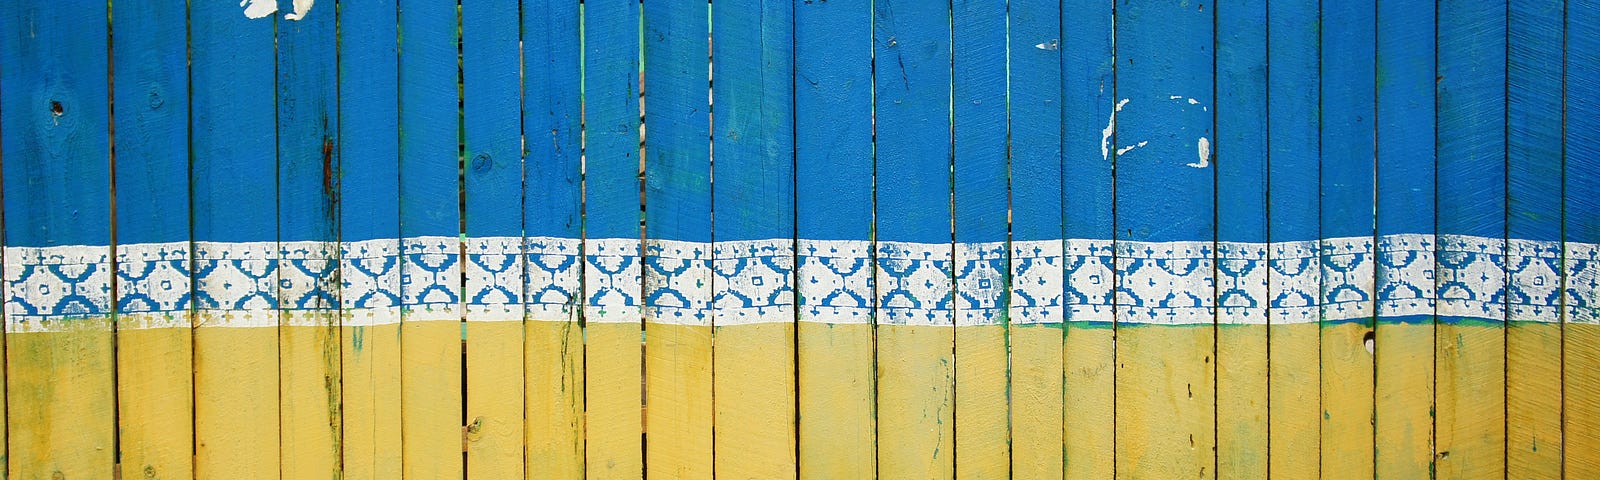 A Fence in Ukraine Painted in the Colors of the Ukrainian Flag